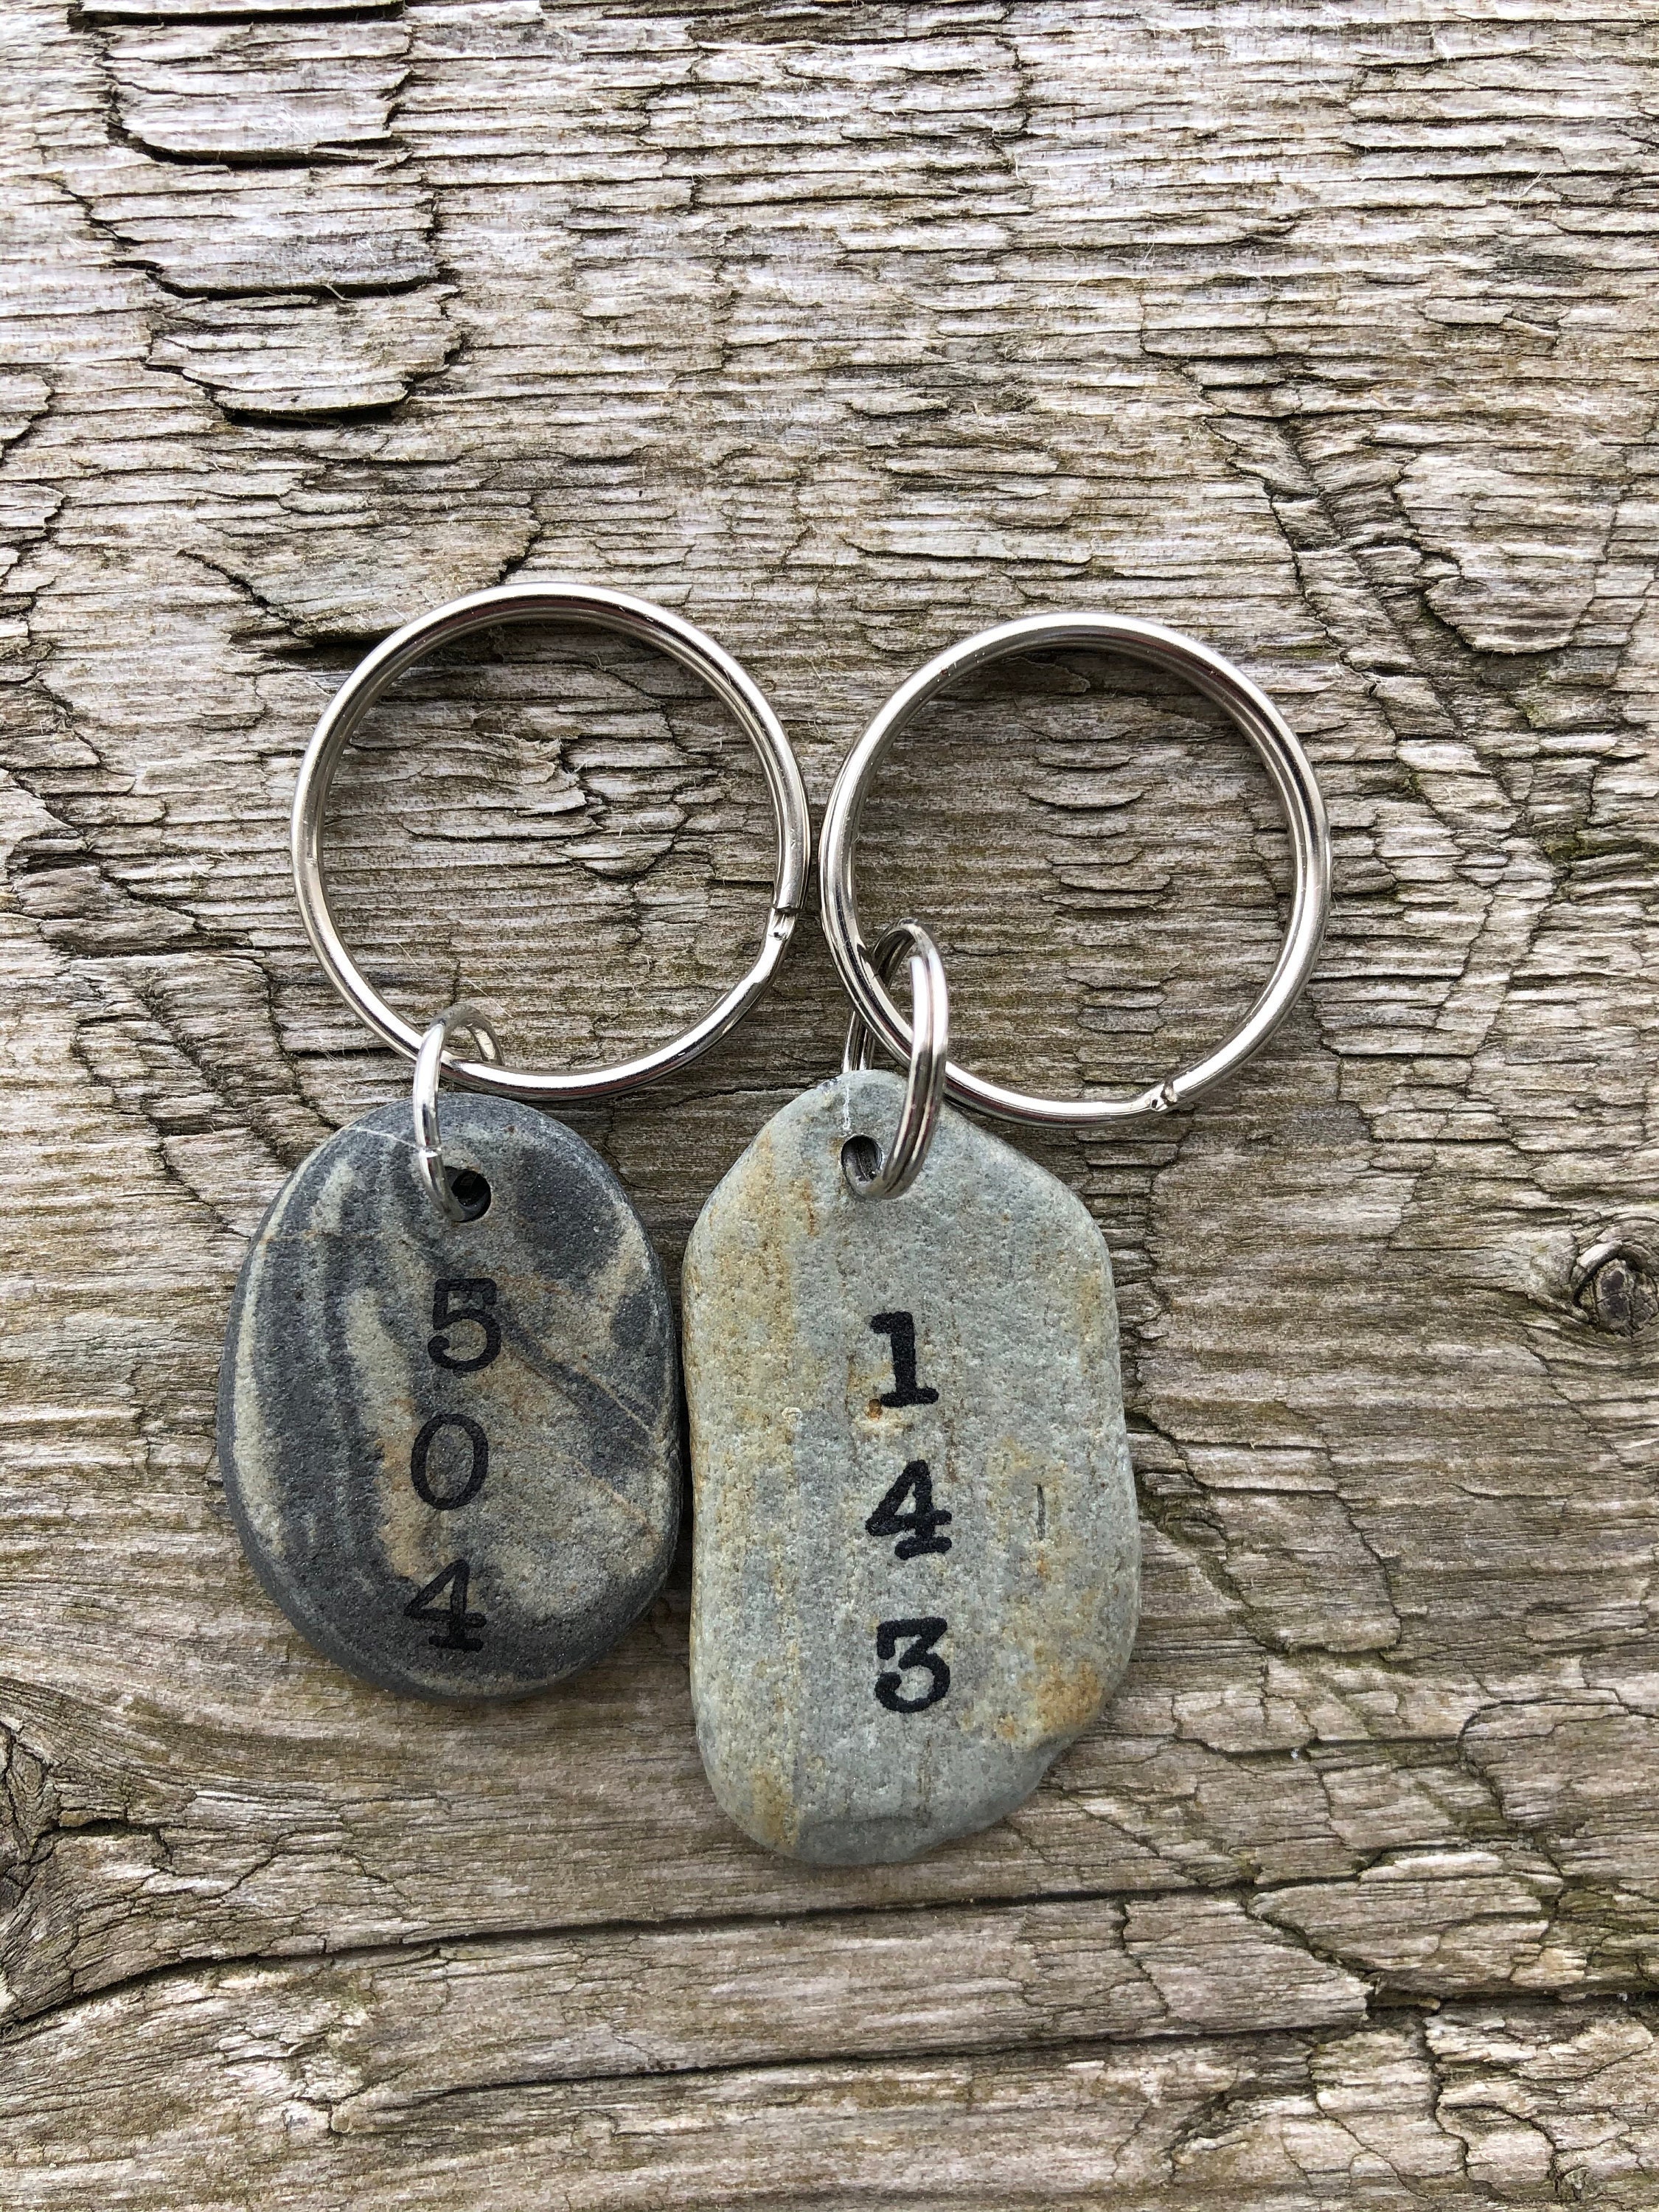 Wholesale Custom Zip/Area Code Keychain for your store